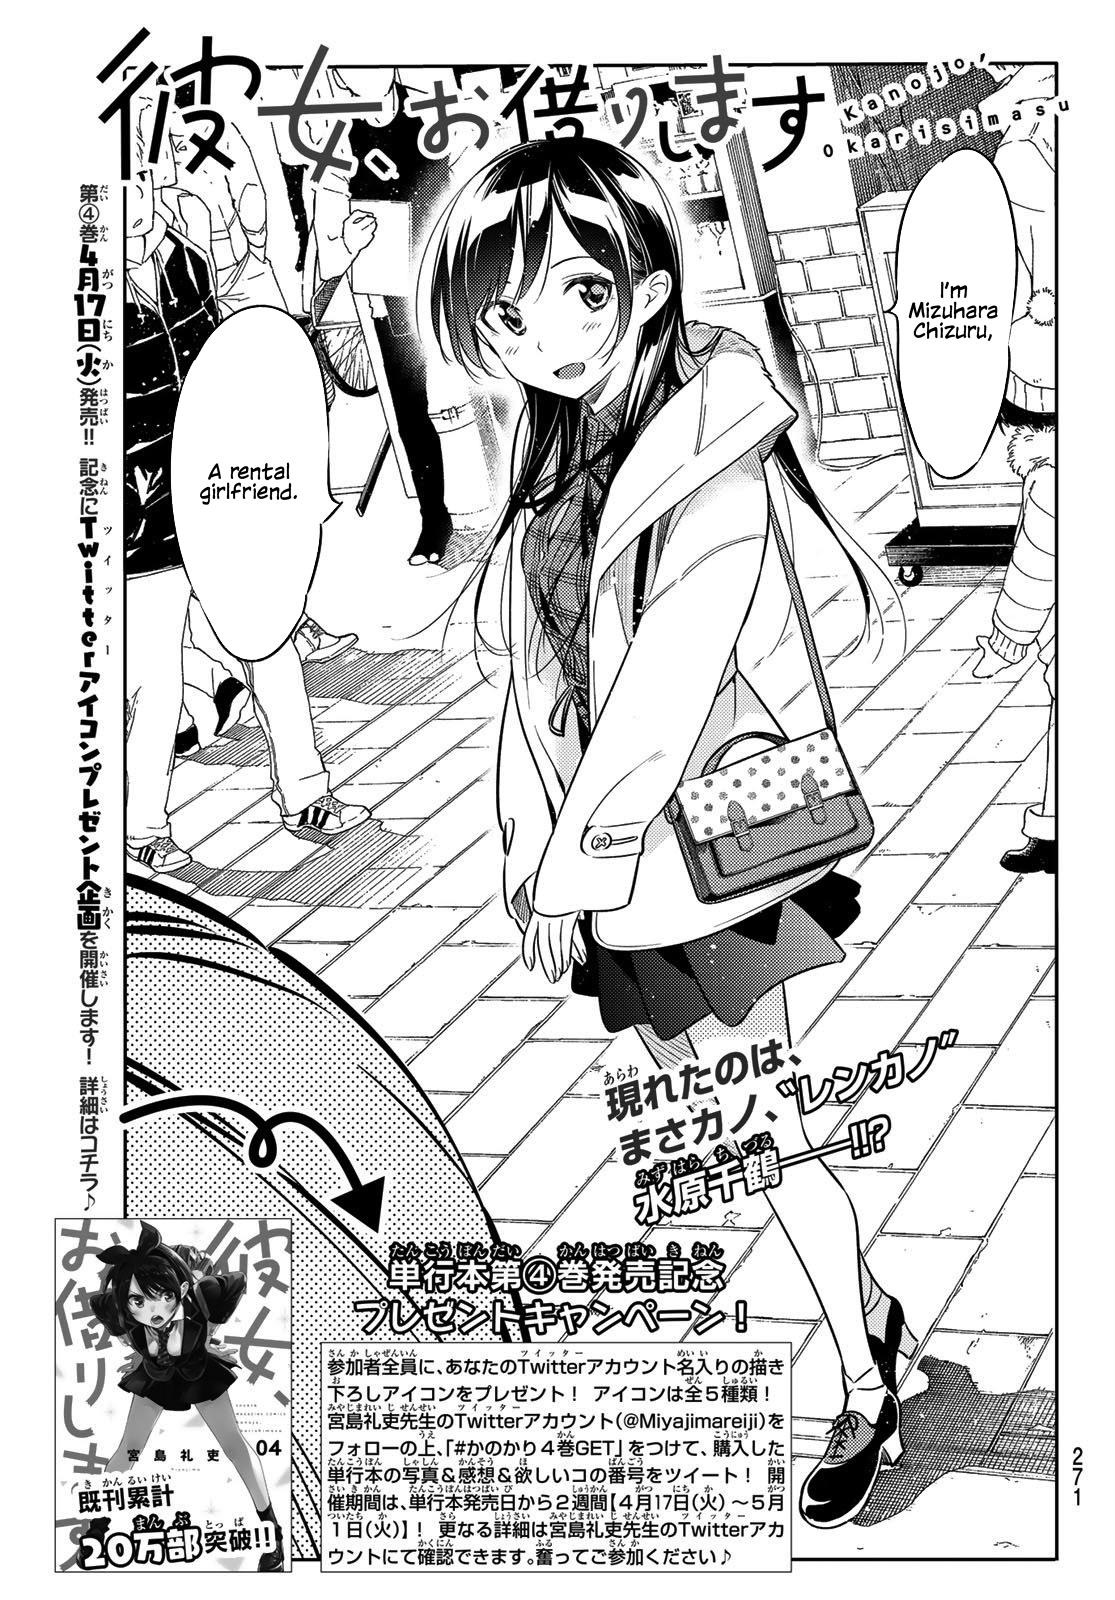 Rent A GirlFriend, Chapter 38 image 001